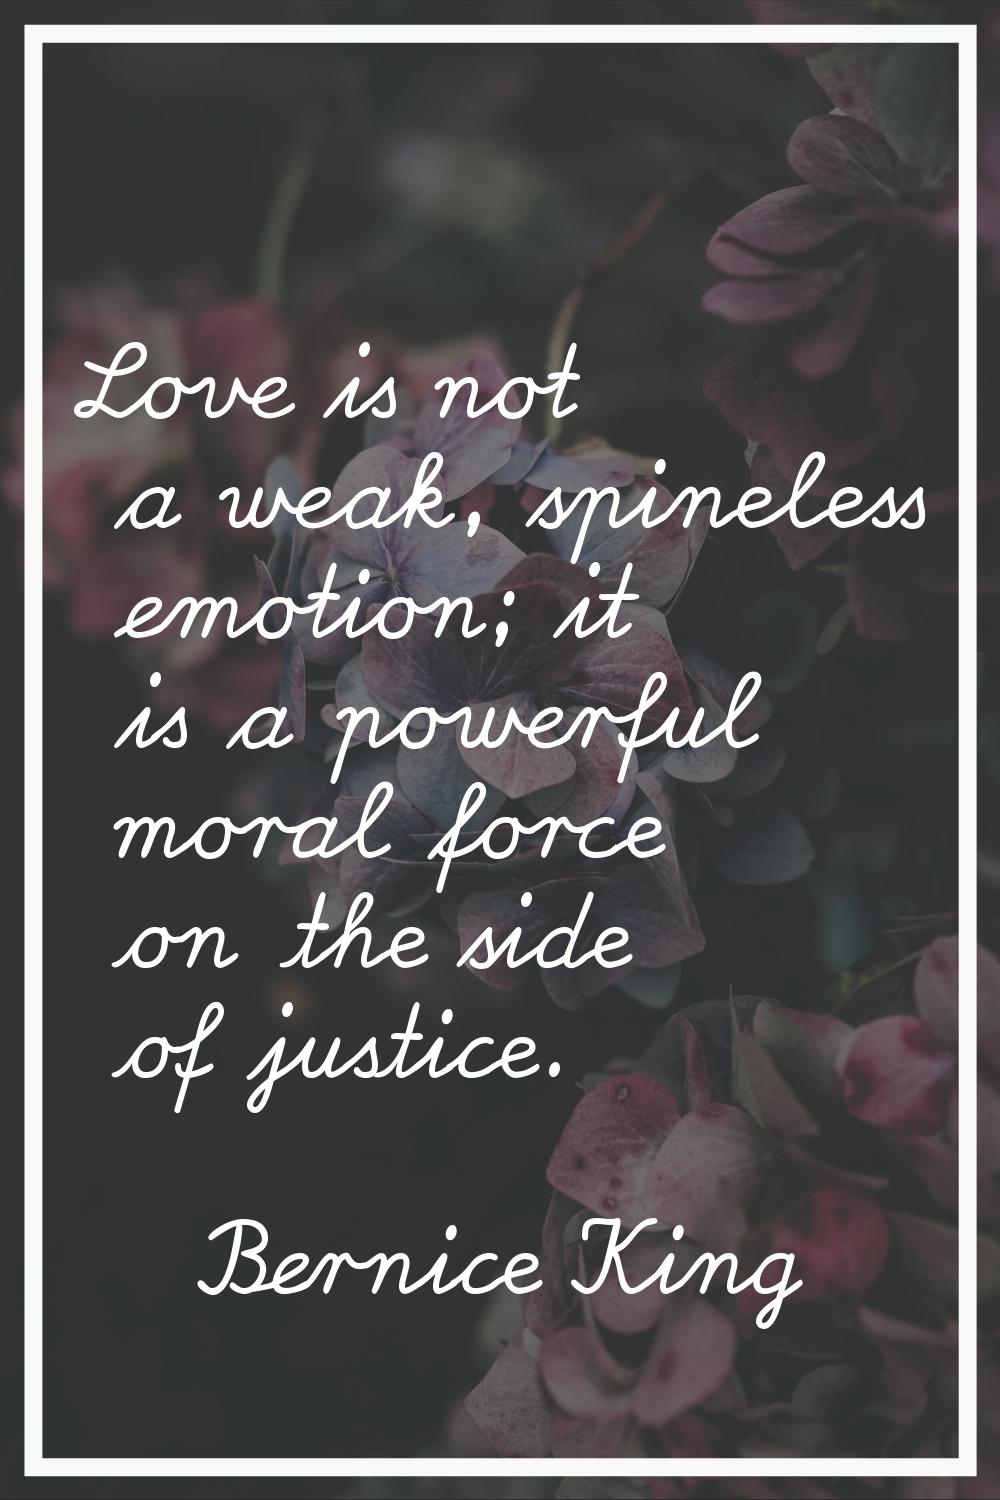 Love is not a weak, spineless emotion; it is a powerful moral force on the side of justice.